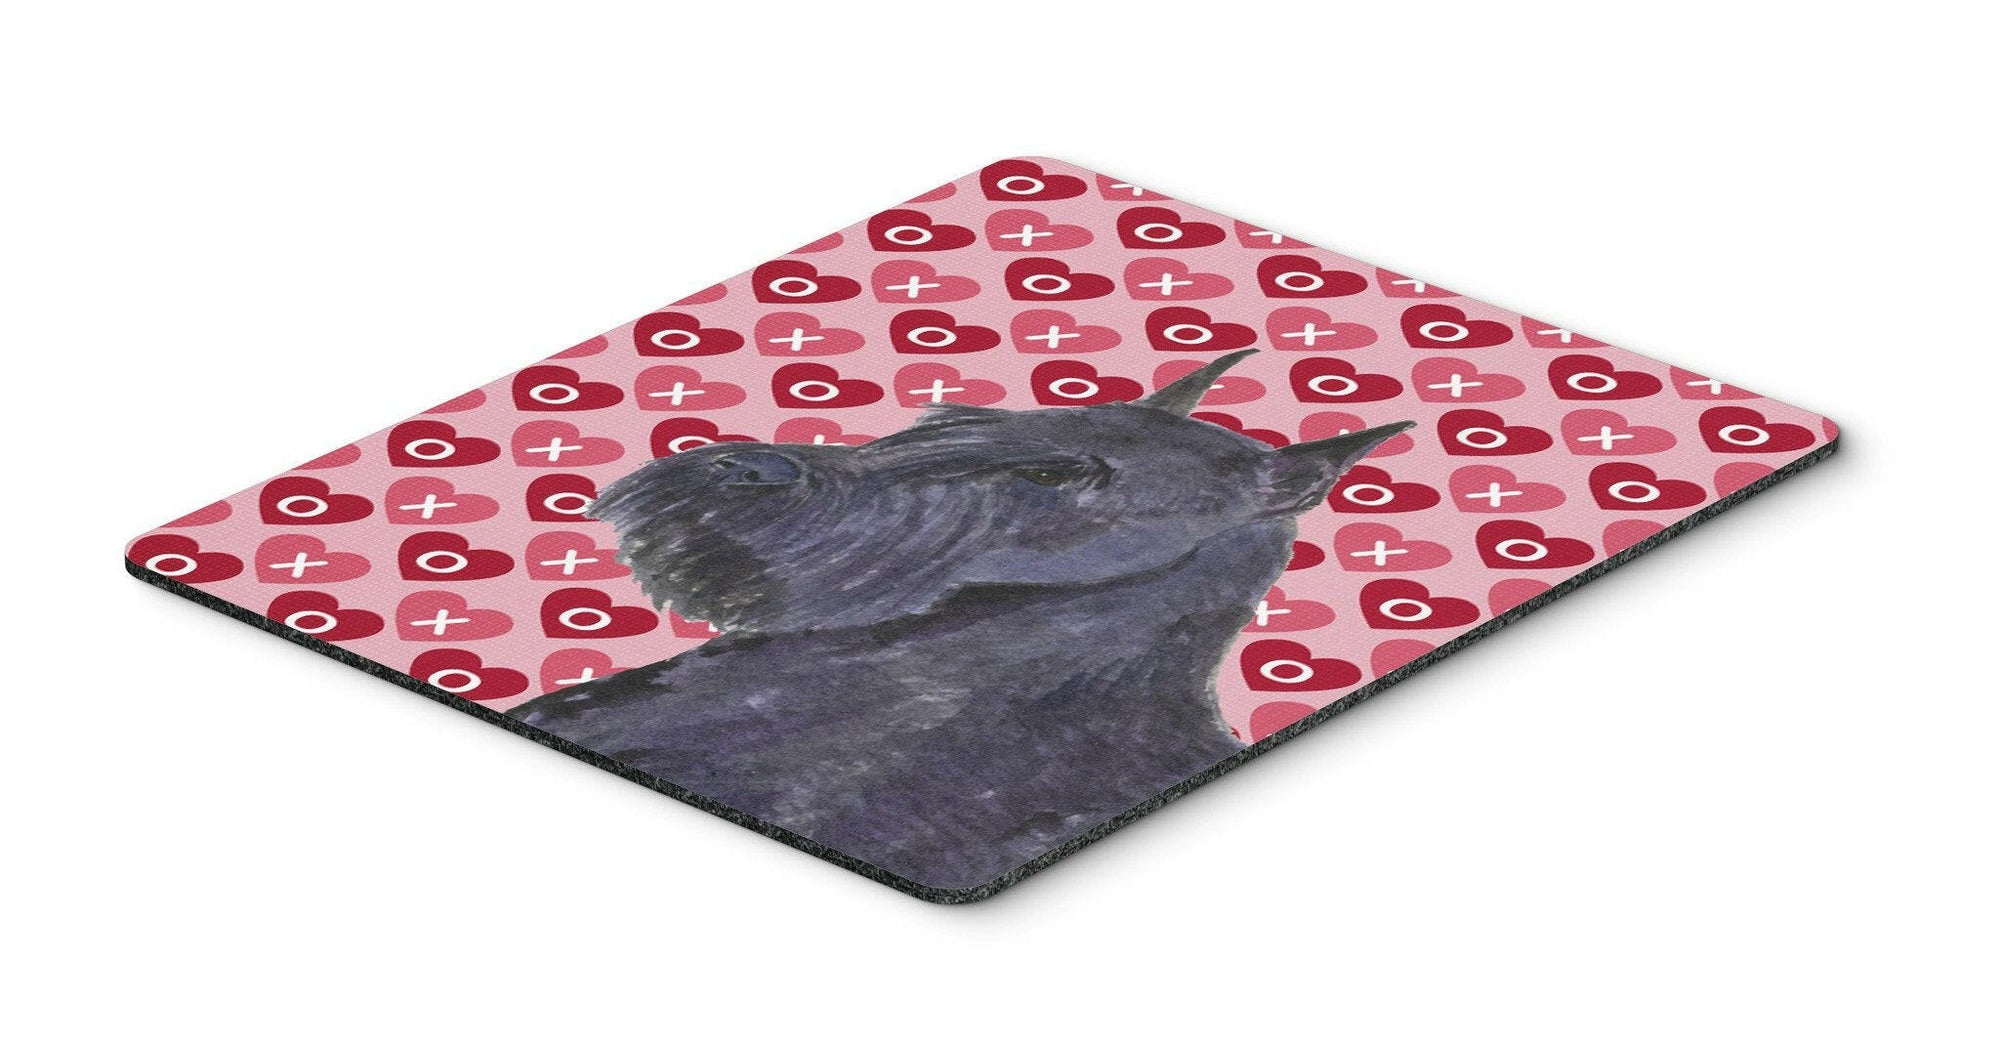 Schnauzer Hearts Love and Valentine's Day Portrait Mouse Pad, Hot Pad or Trivet by Caroline's Treasures